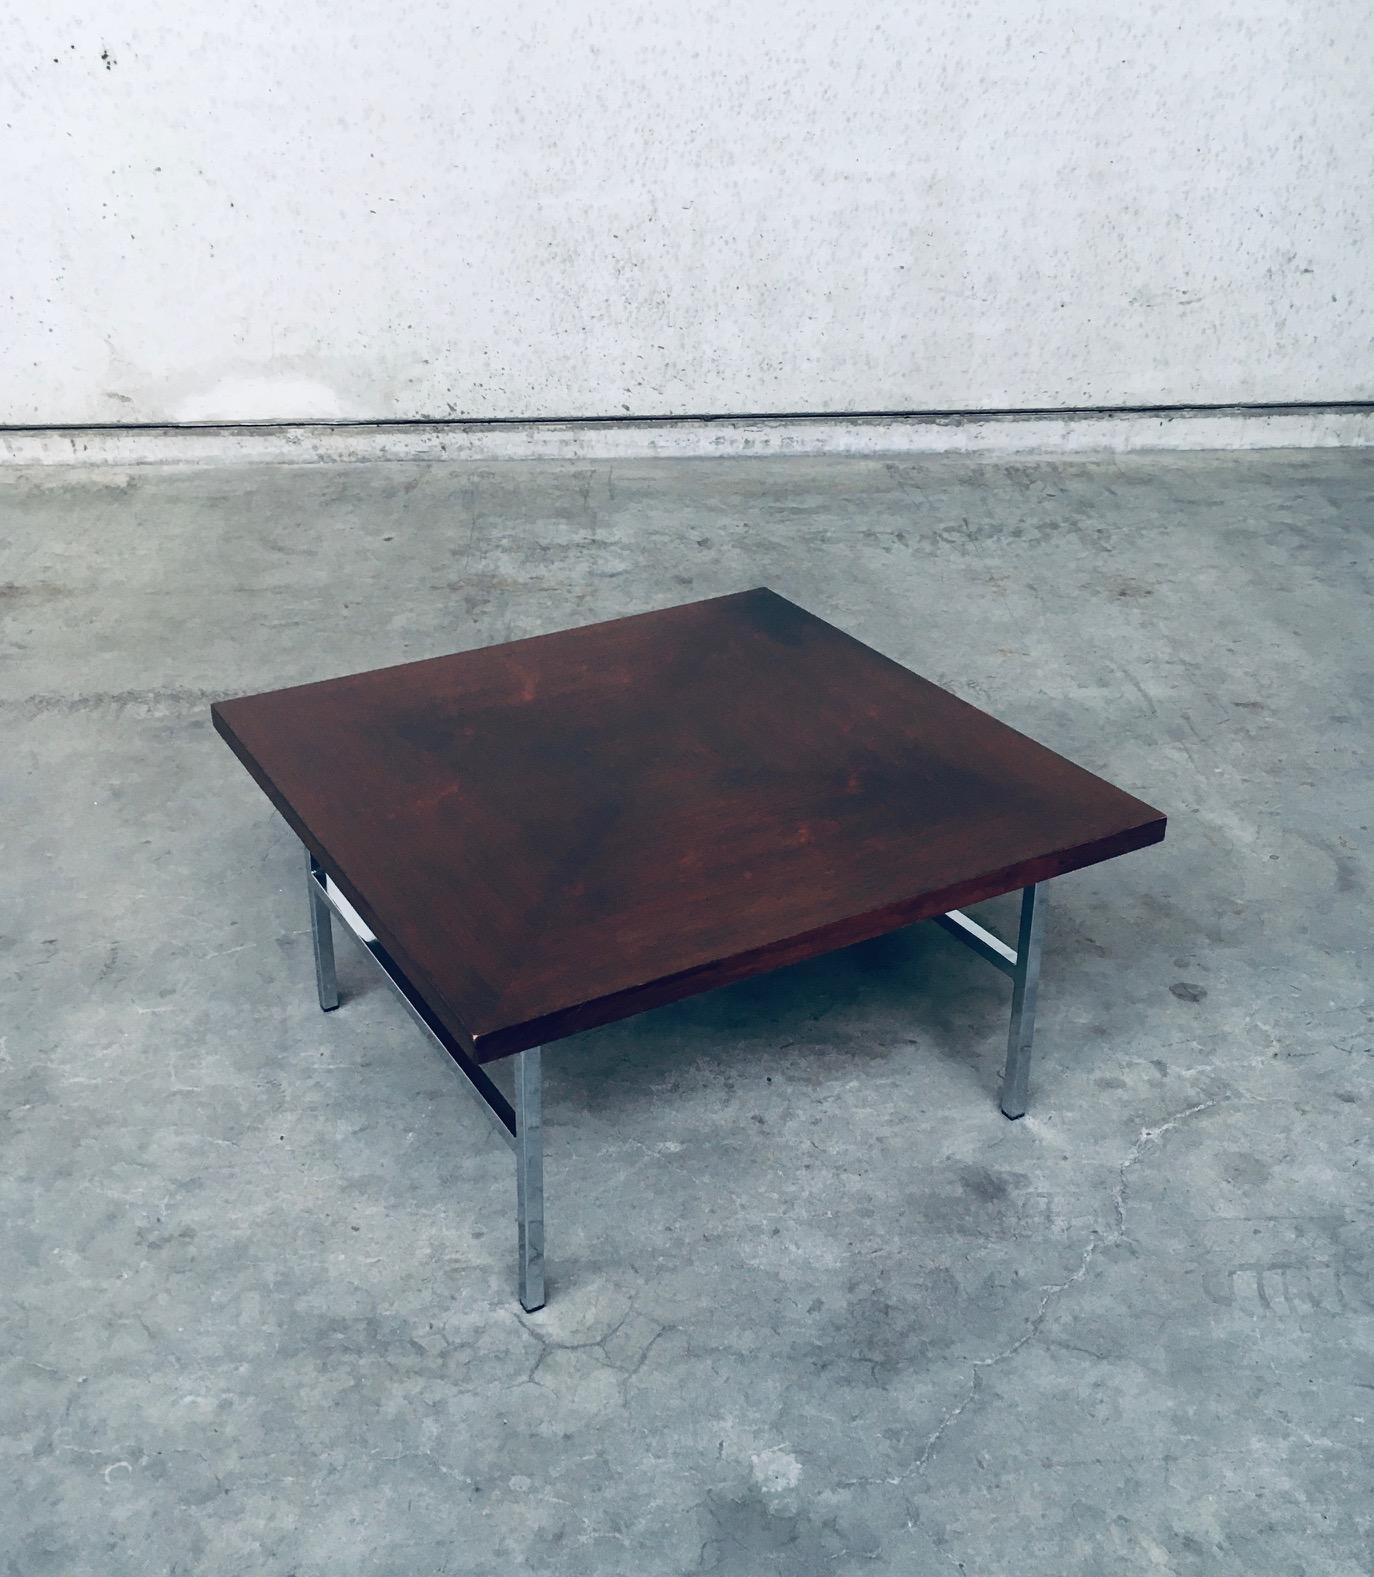 Midcentury Dutch Design Coffee Table, Netherlands 1960's In Good Condition For Sale In Oud-Turnhout, VAN